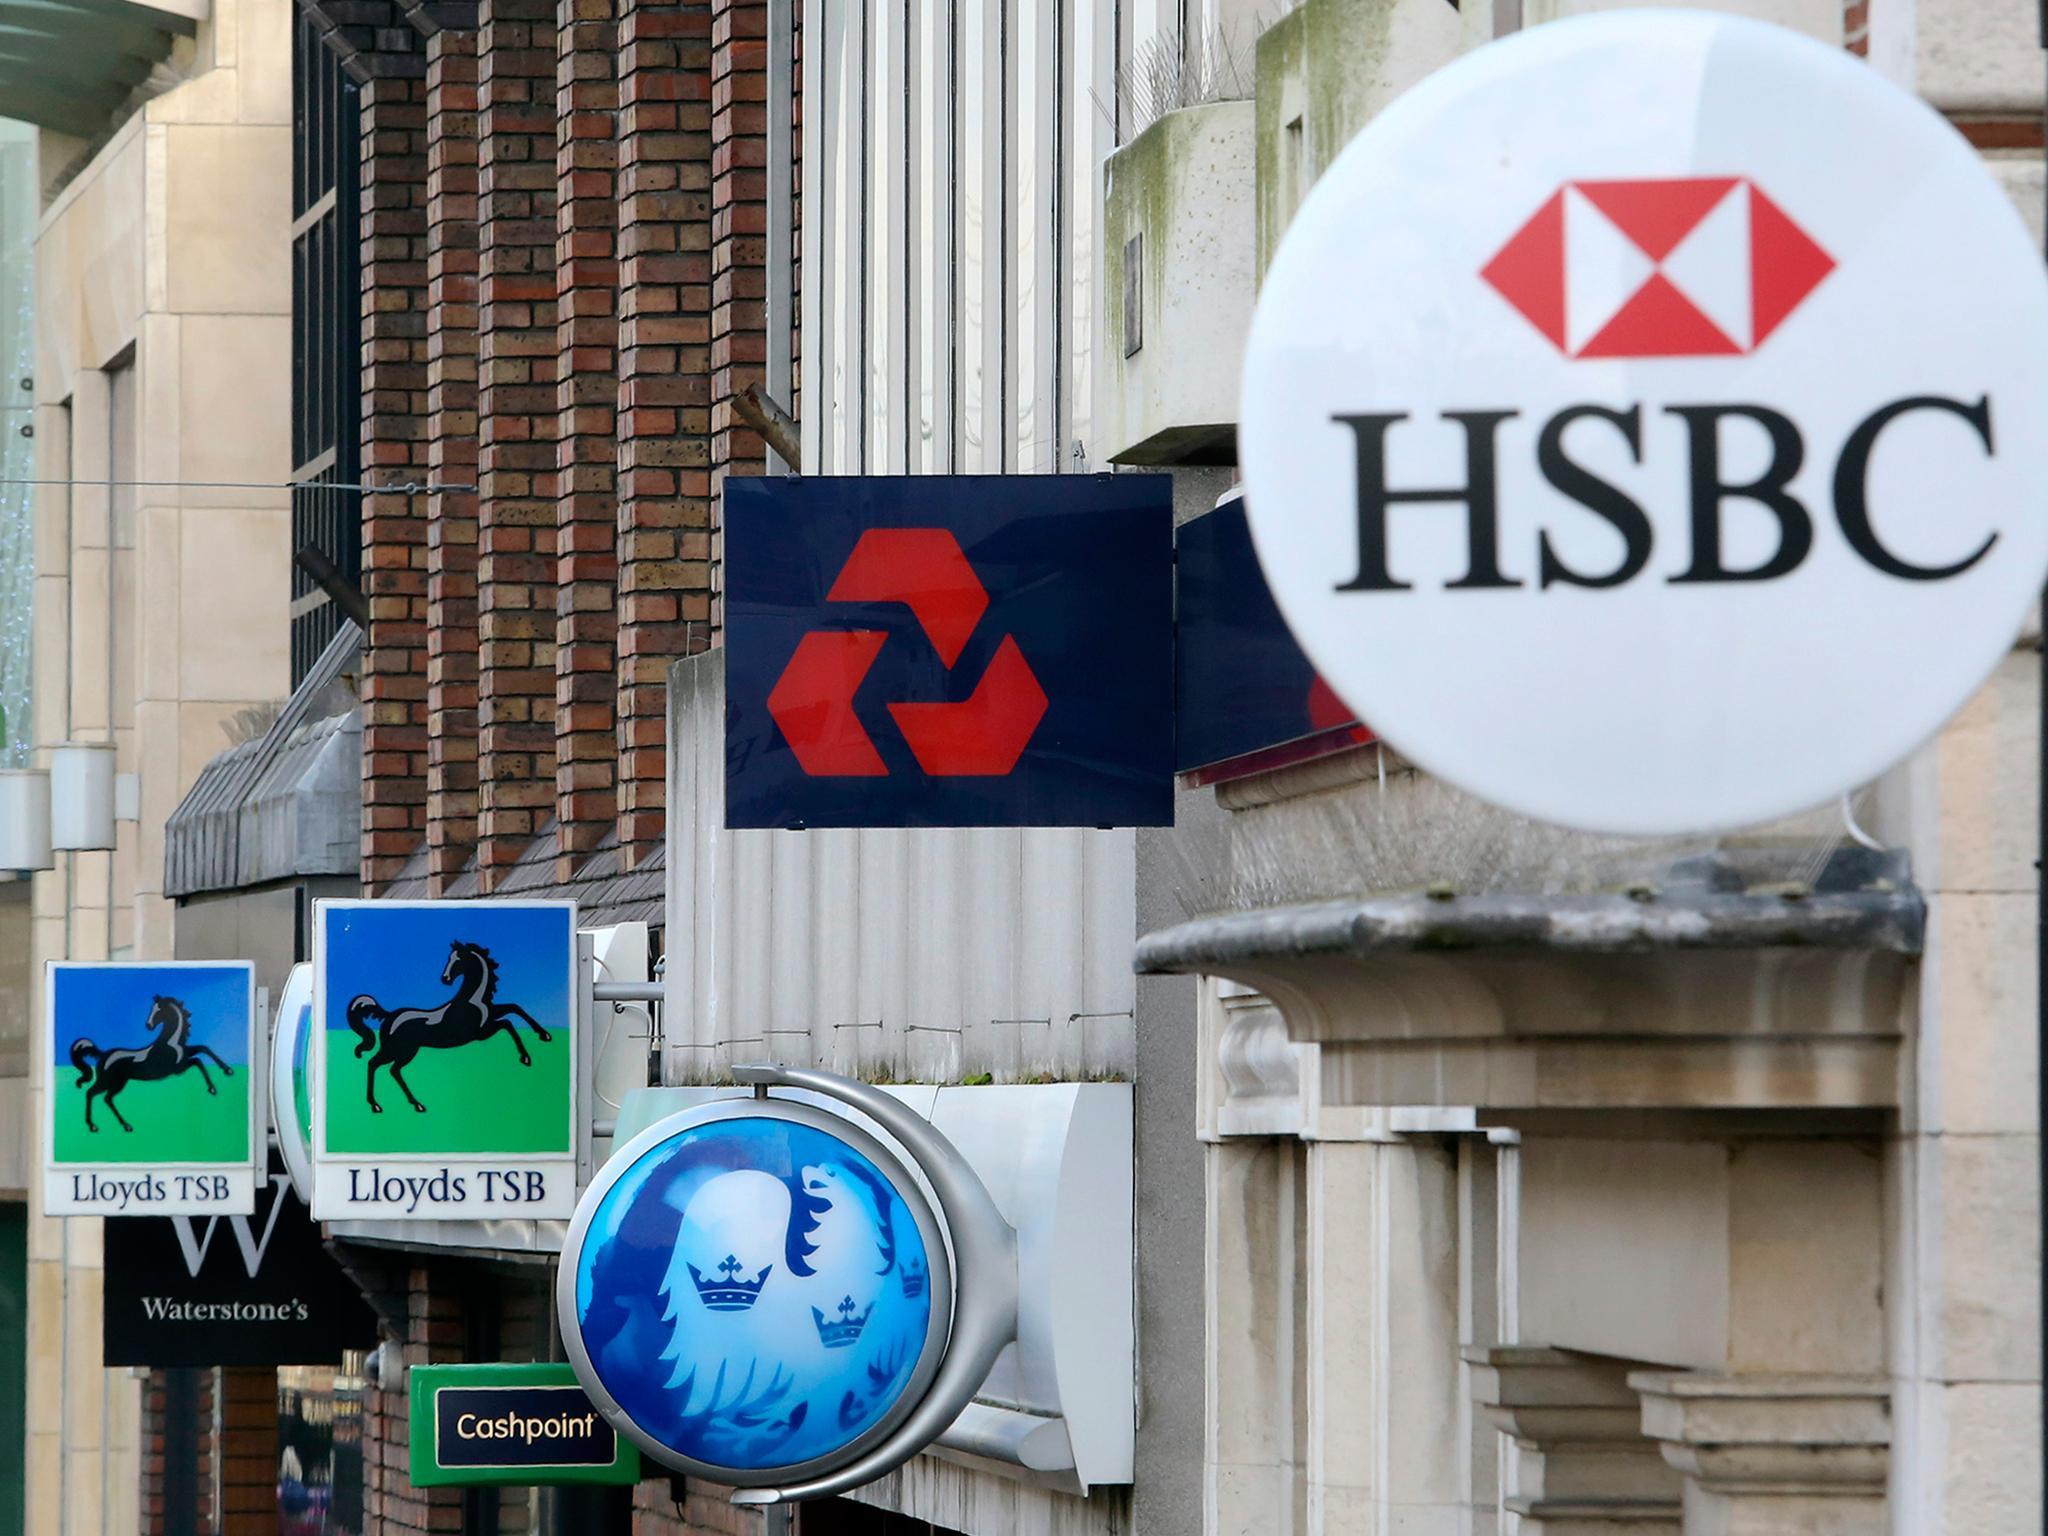 High street banks have been less willing to lend to small businesses since the financial crisis